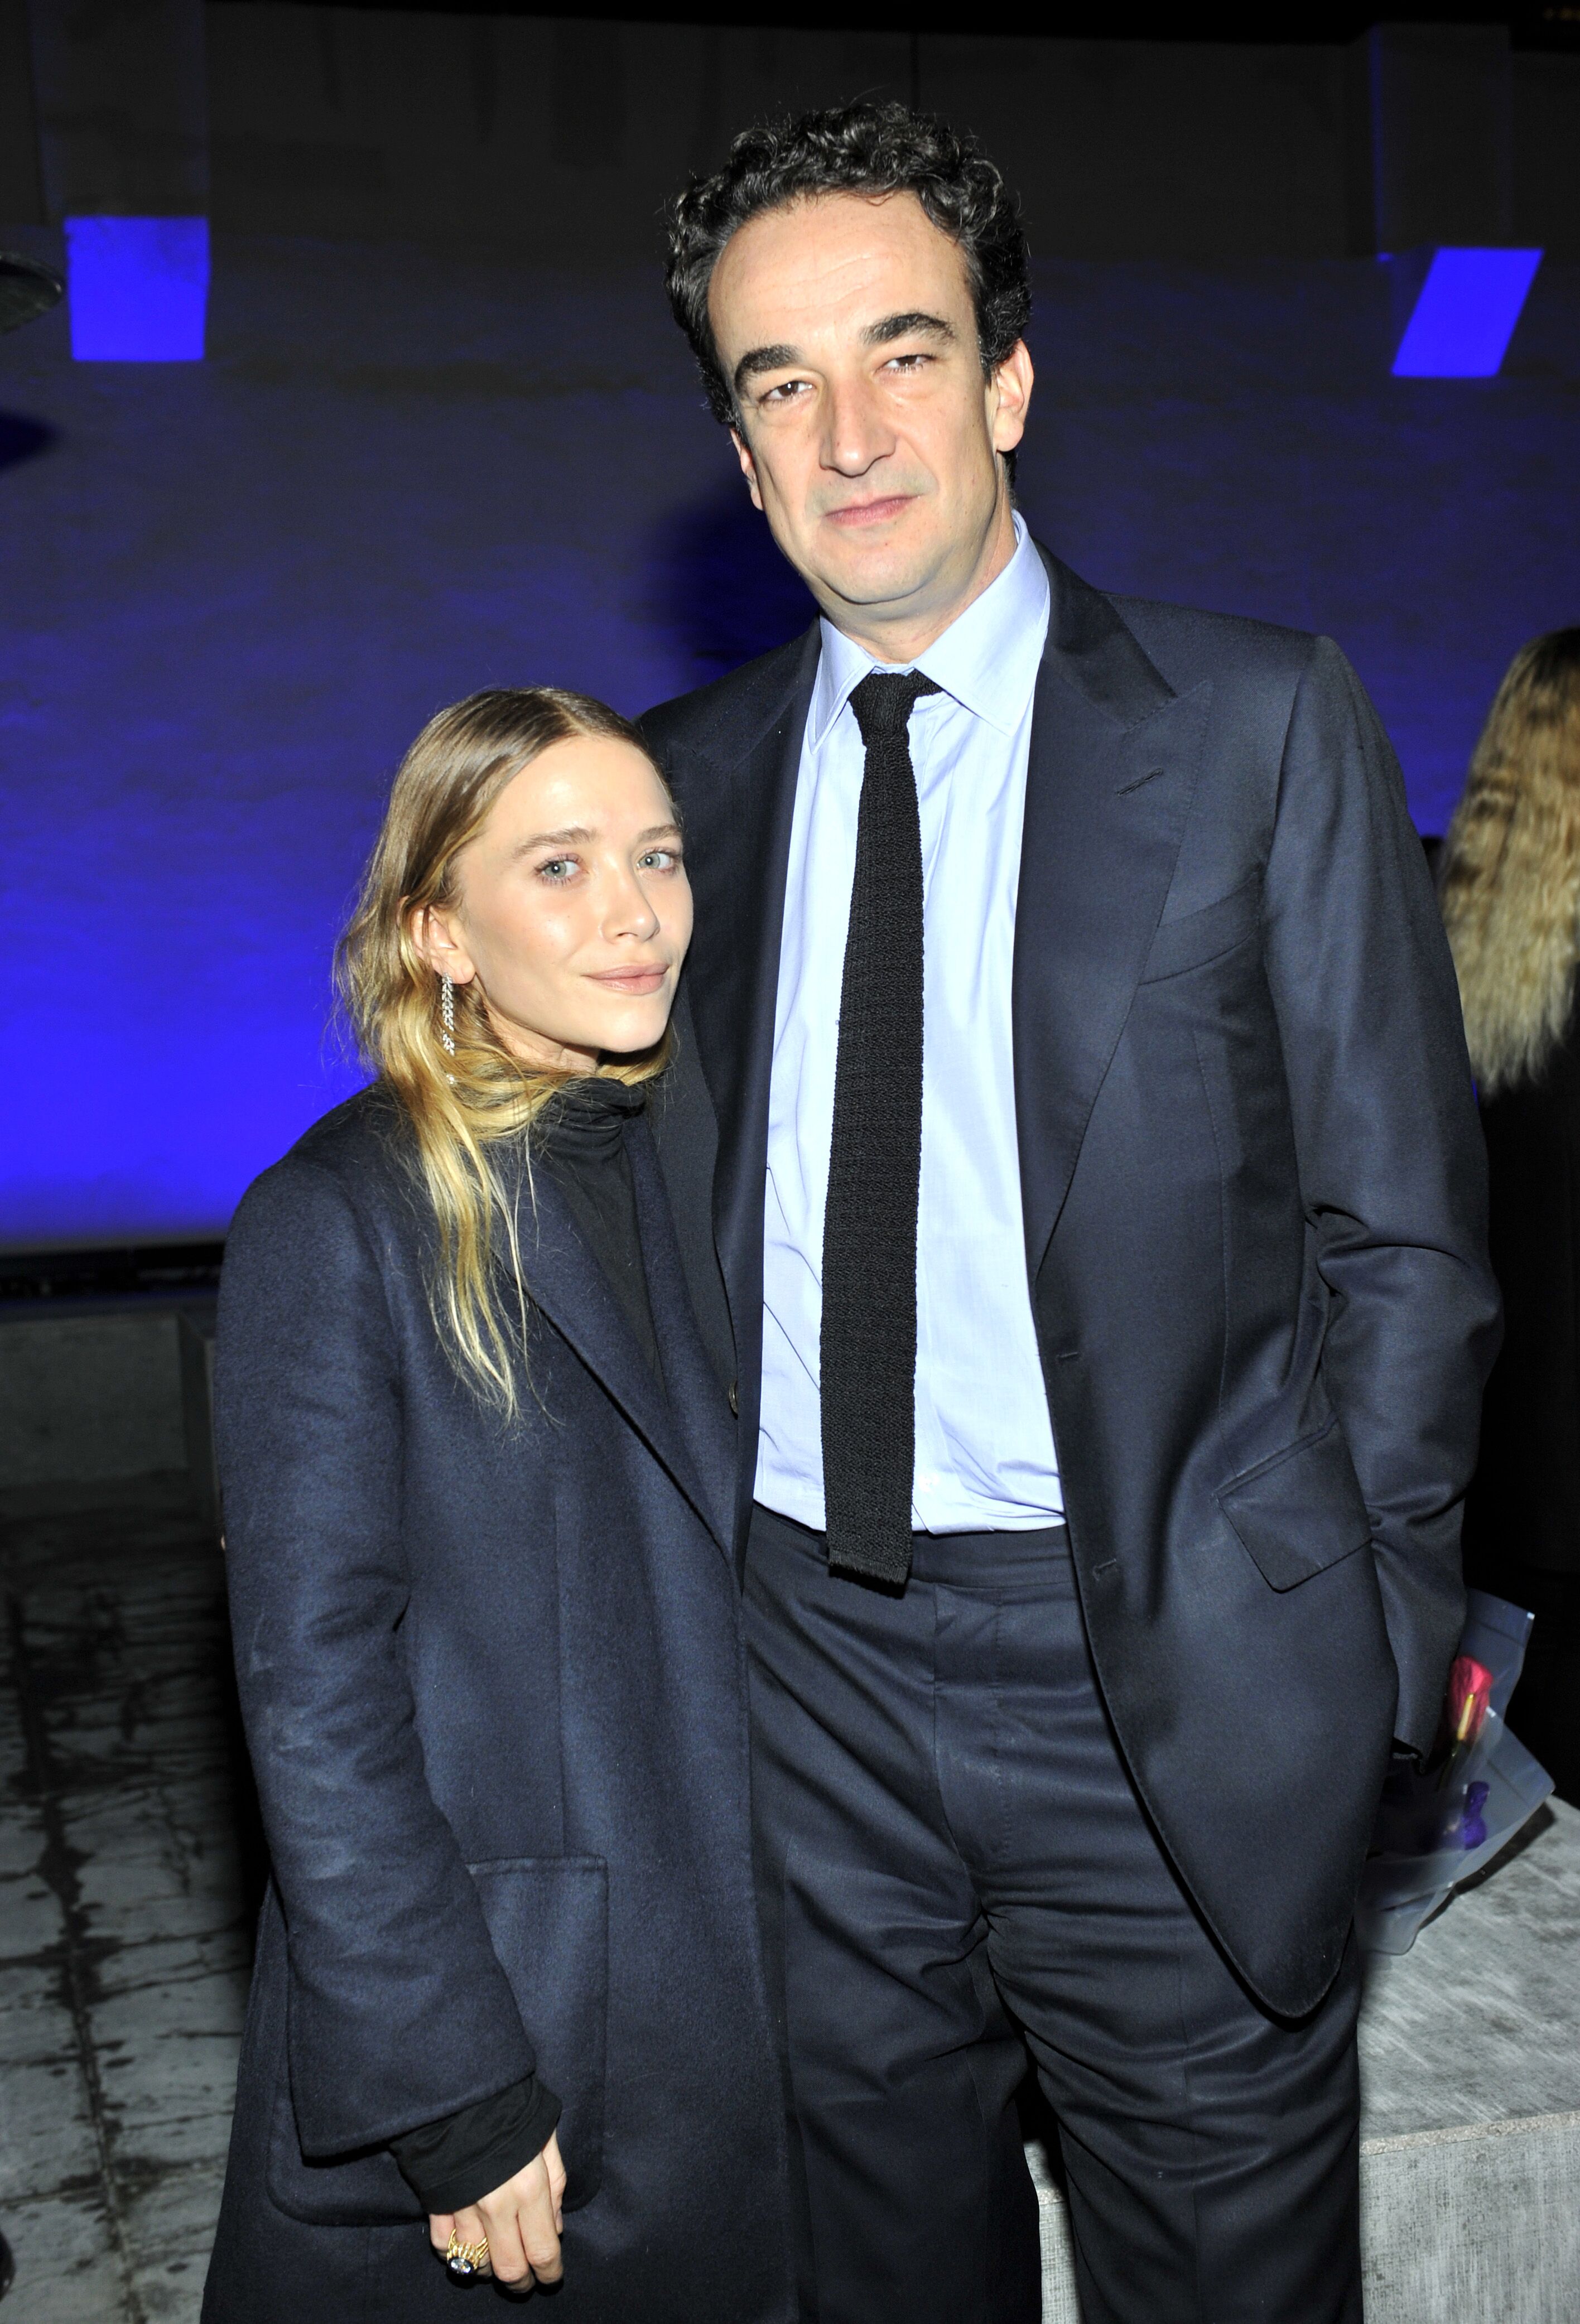 Mary-Kate Olsen and Olivier Sarkozy at the launch of Just One Eye's Ulysses Tier 1 on December 5, 2014 in Los Angeles, California | Source: Getty Images